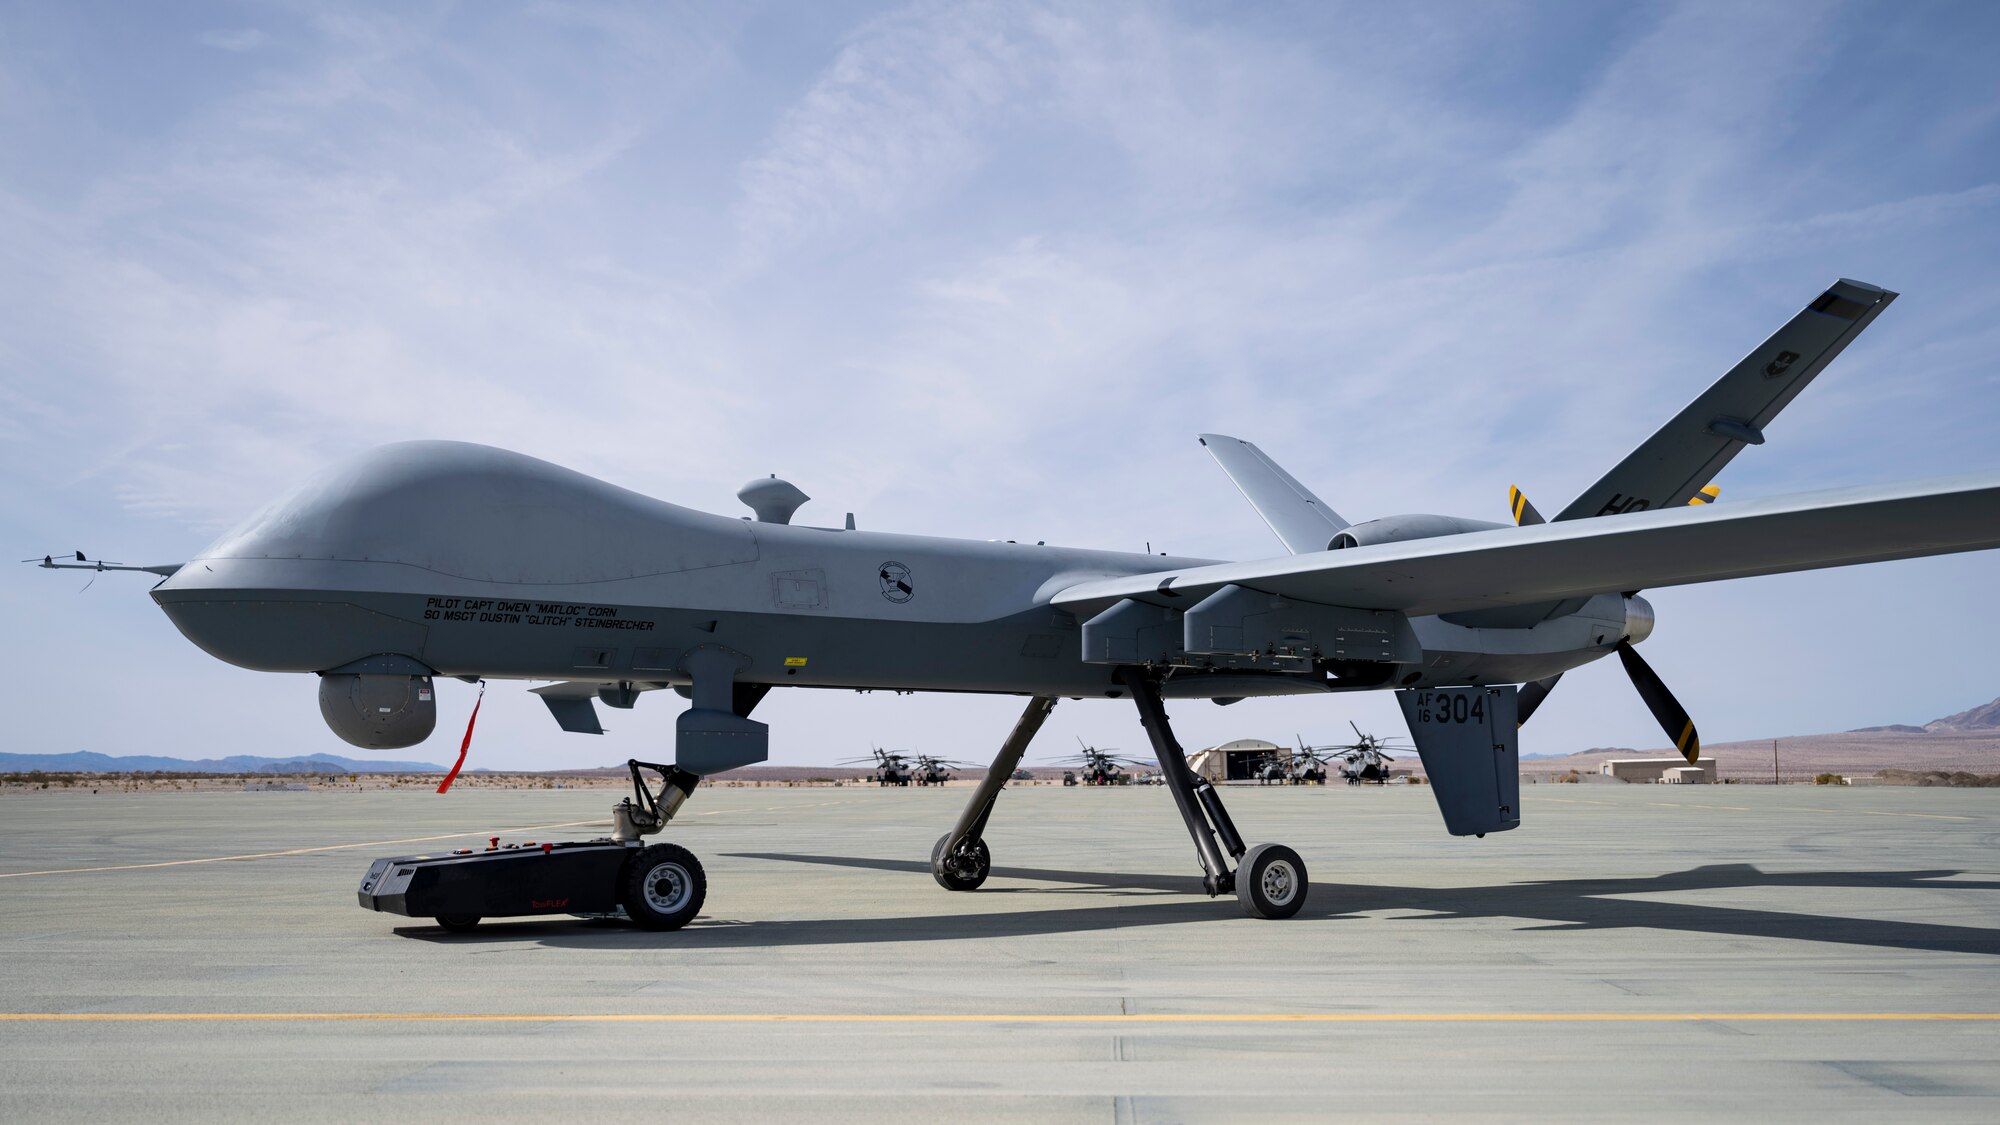 A TowFLEXX TF3 aircraft tug hauls an MQ-9 Reaper along a runway at Marine Corps Air Ground Combat Command Center, Twentynine Palms, California, Feb. 16, 2023. Agile Combat Employment Reaper 23.6 saw Airmen from Holloman Air Force Base, Cannon AFB, N.M., and Creech AFB, Nevada, participated in Agile Combat Employment Reaper 23.6 at Twentynine Palms to hone their skills while also supporting RPA training for the Marines. (U.S. Air Force photo by Staff Sgt. Kristin West)